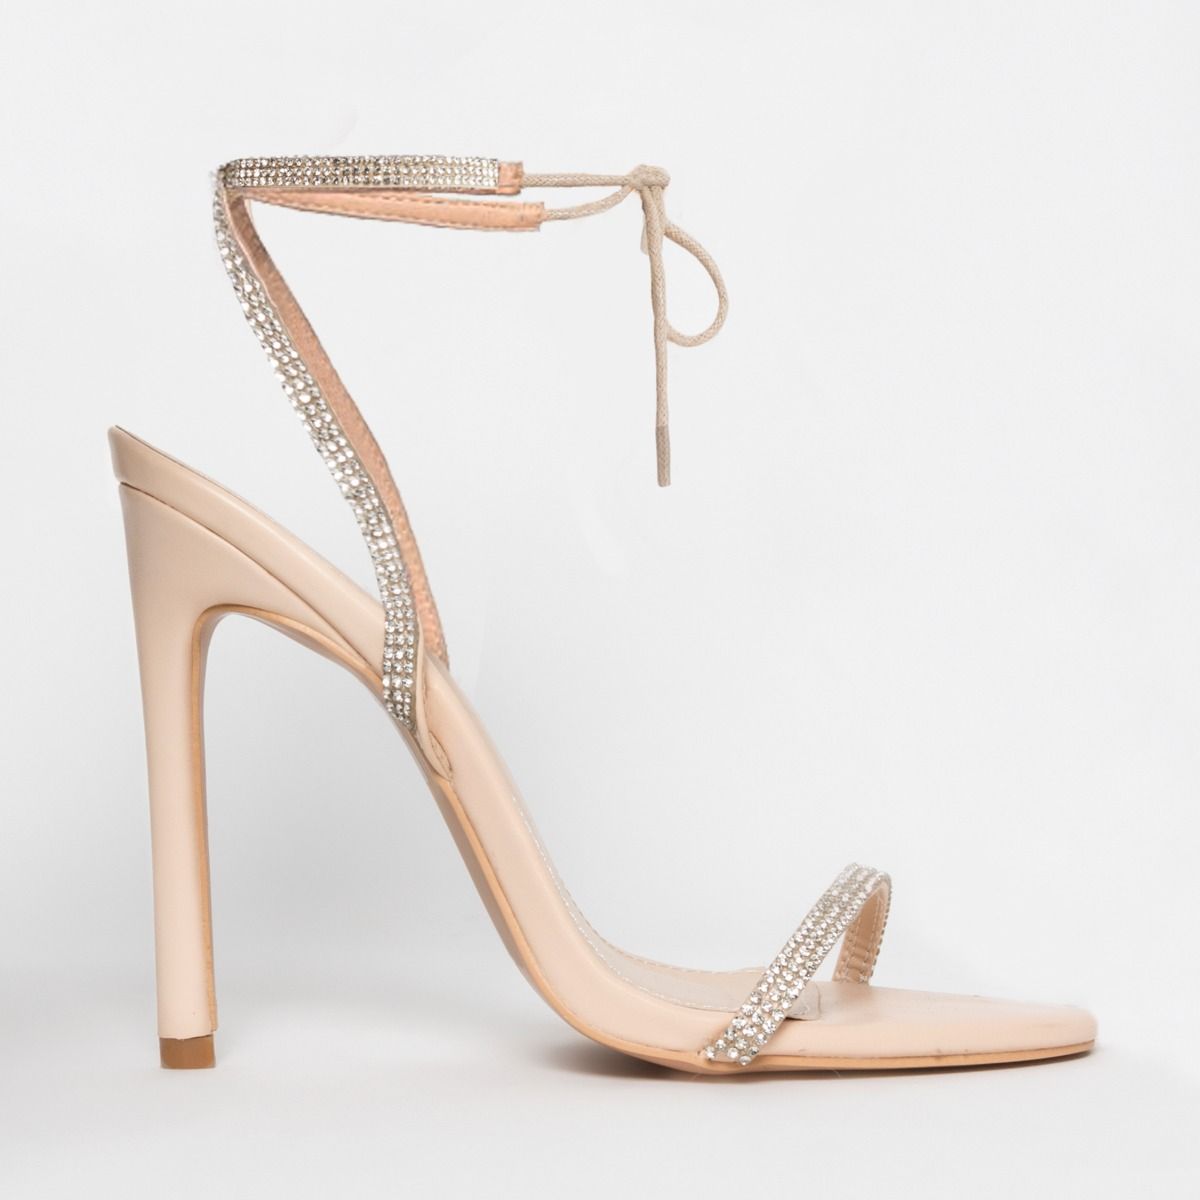 diamante barely there heels